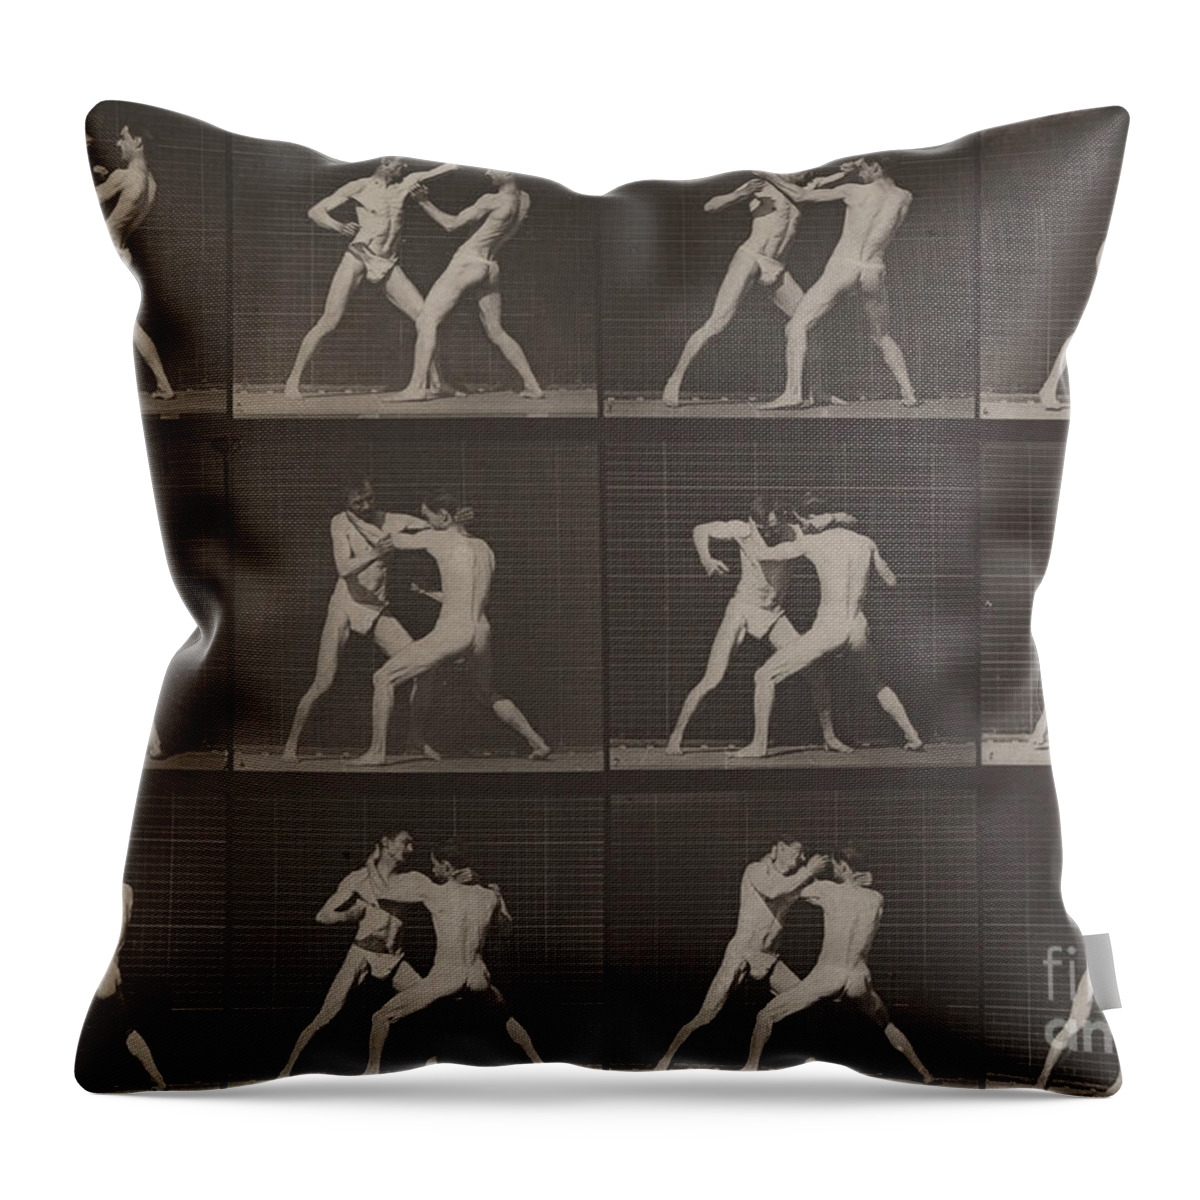 Mma Throw Pillow featuring the photograph Boxing by Eadweard Muybridge by Eadweard Muybridge